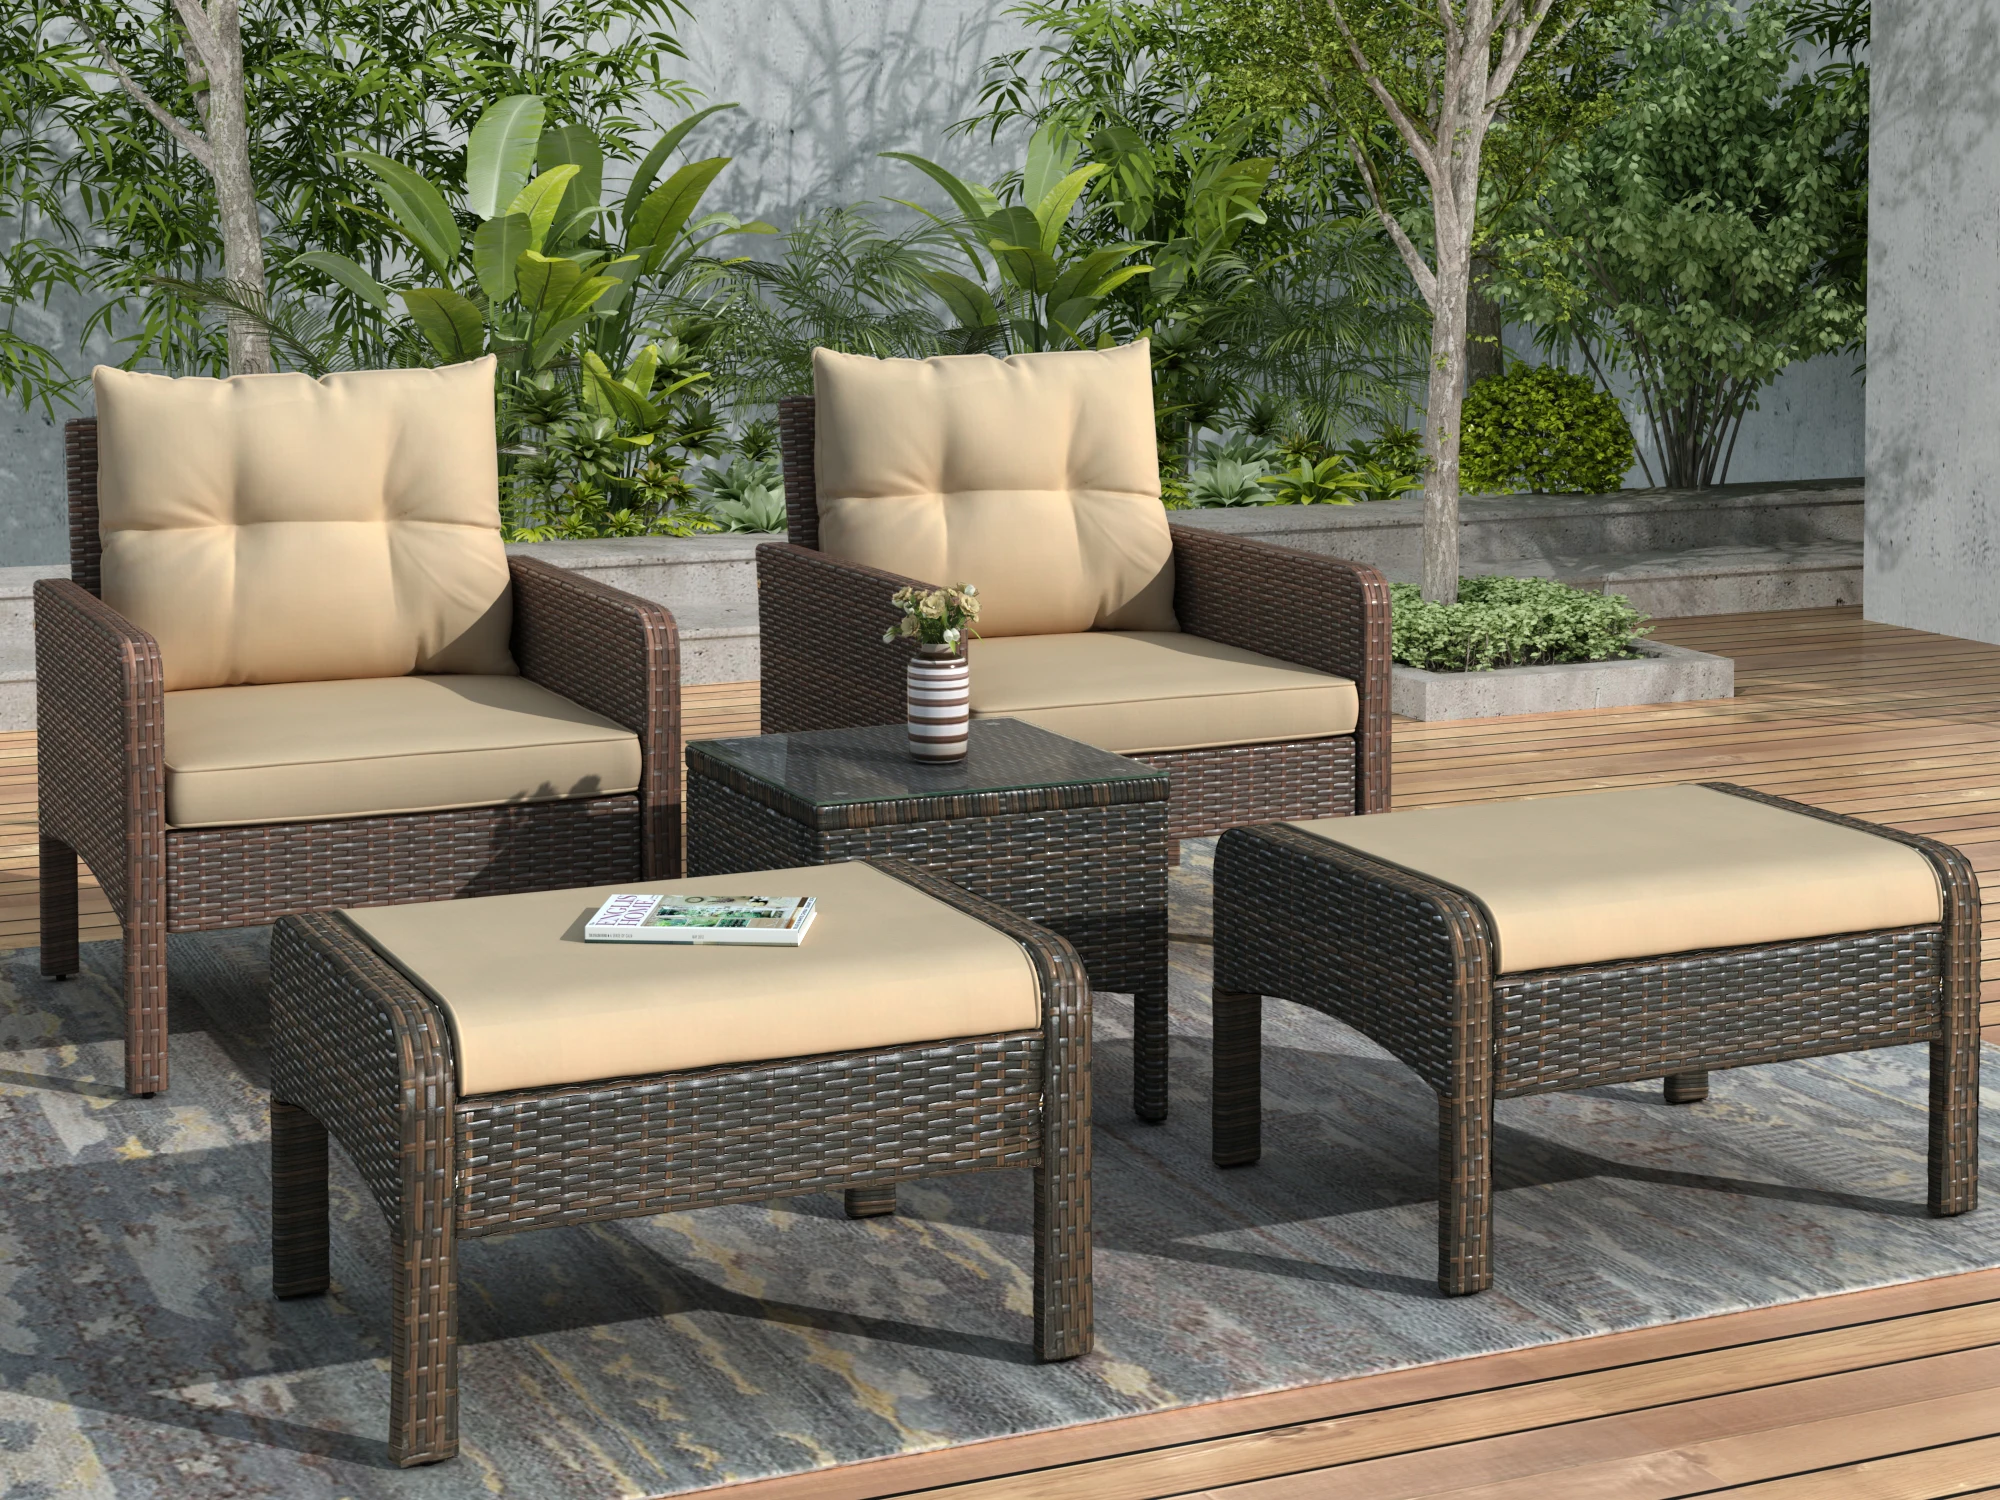 

5-Piece PE Rattan Wicker Outdoor Patio Furniture Set Brown Include 2 Sofa Chair+2 Footstool+1 Glass Table[US-Stock]